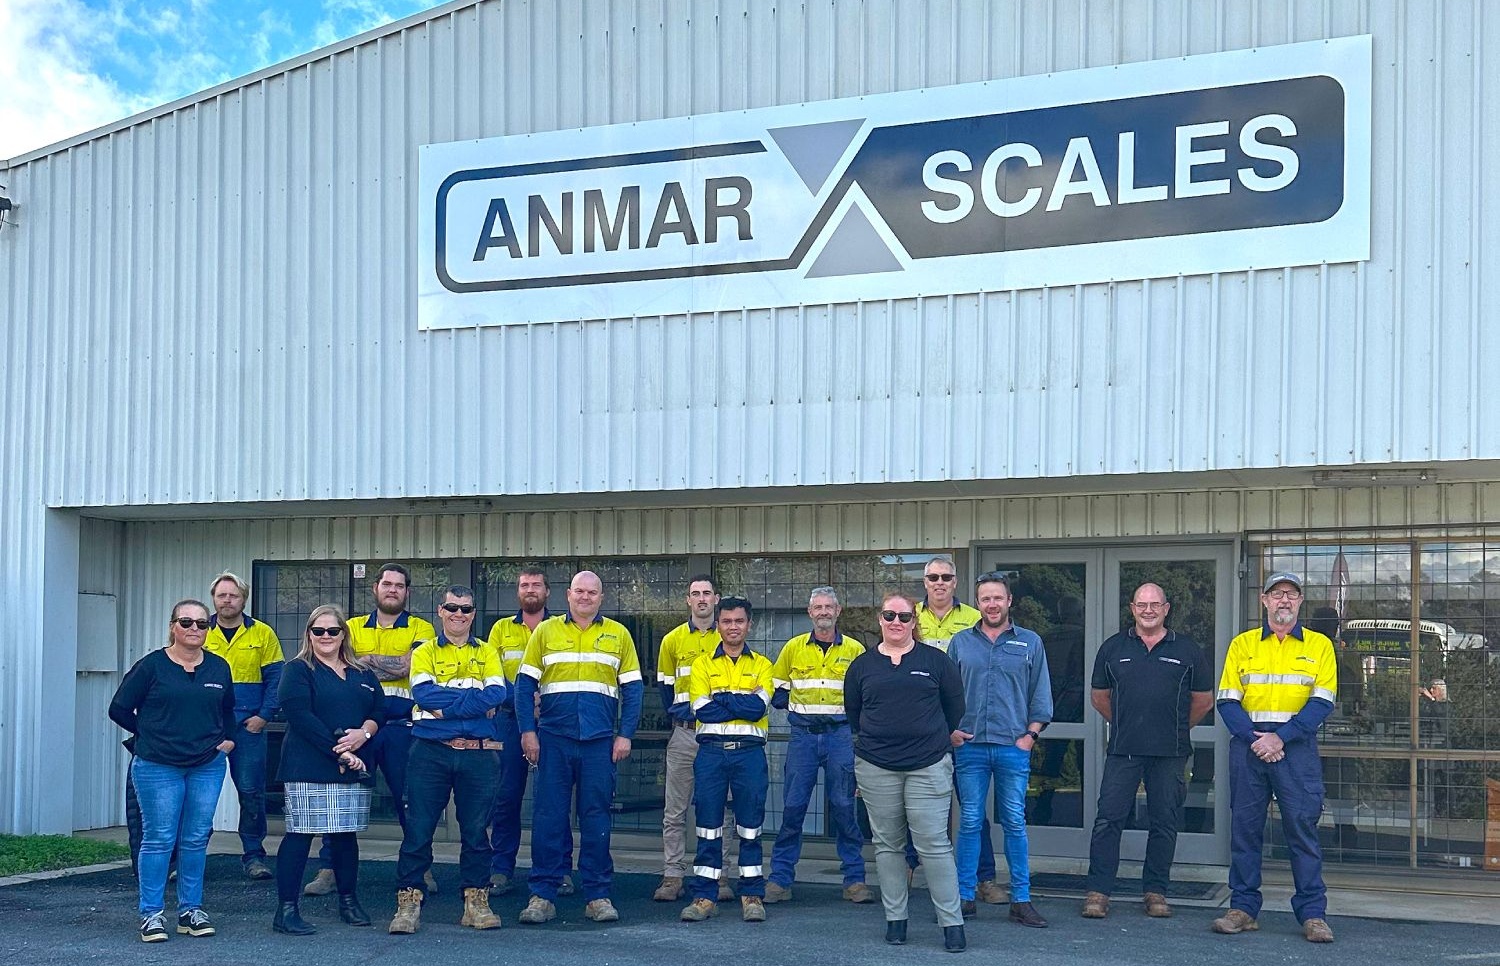 Anmar Scales Staff